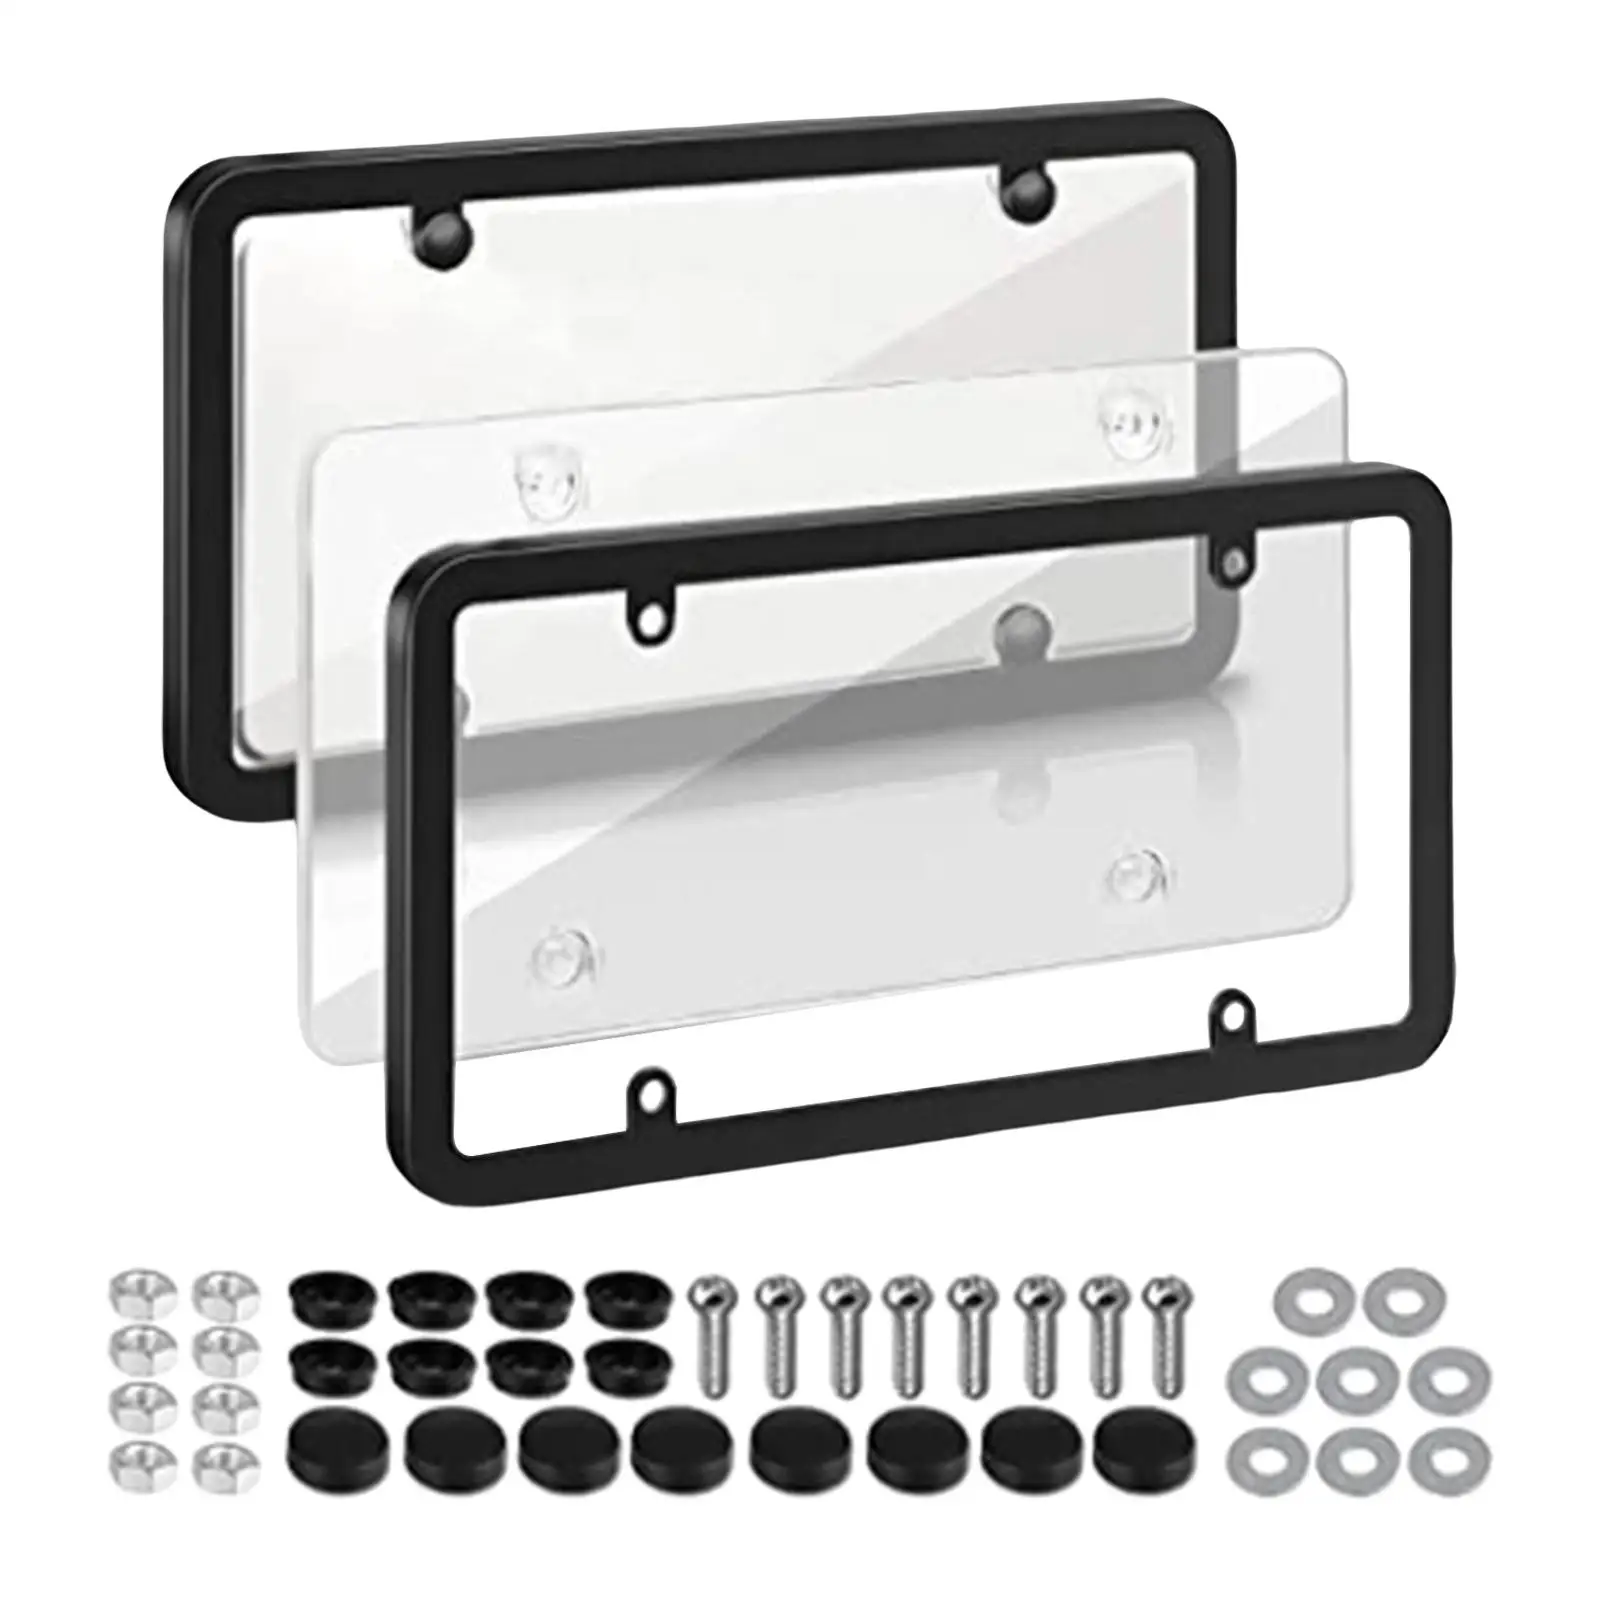 Universal American Plate Frame Car Plate Frame for Vehicles